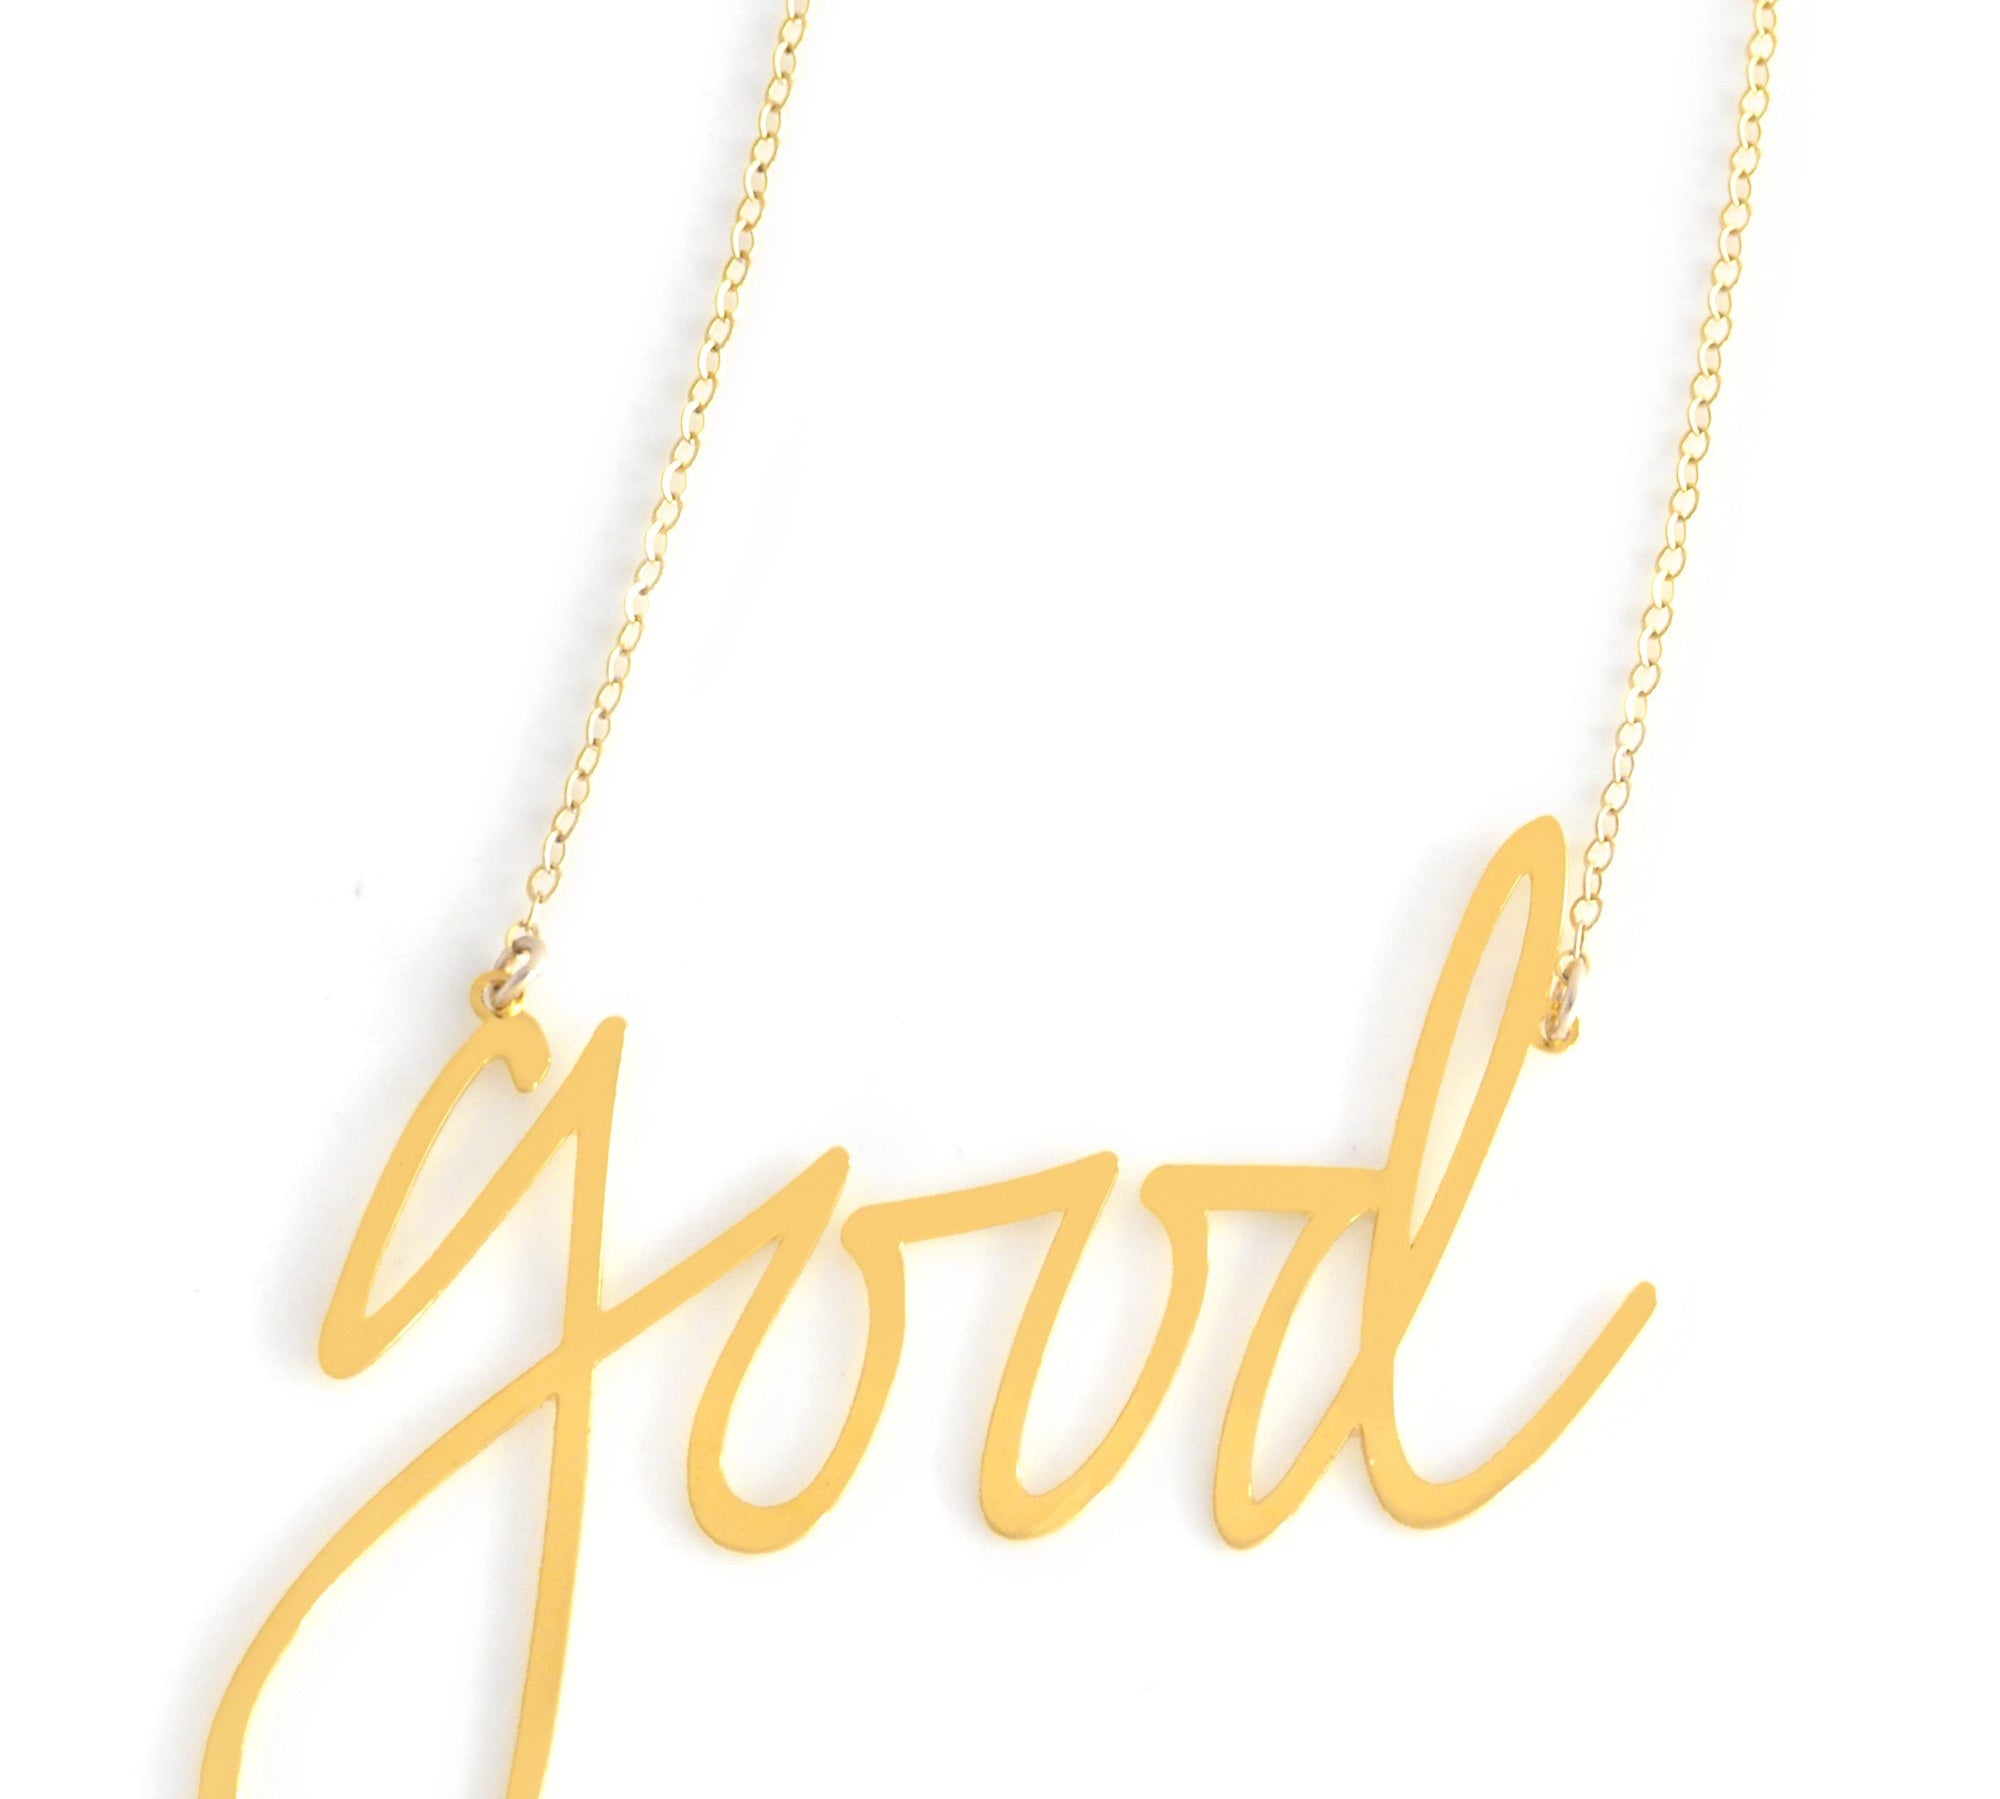 Good Necklace - High Quality, Affordable, Hand Written, Self Love, Mantra Word Necklace - Available in Gold and Silver - Small and Large Sizes - Made in USA - Brevity Jewelry